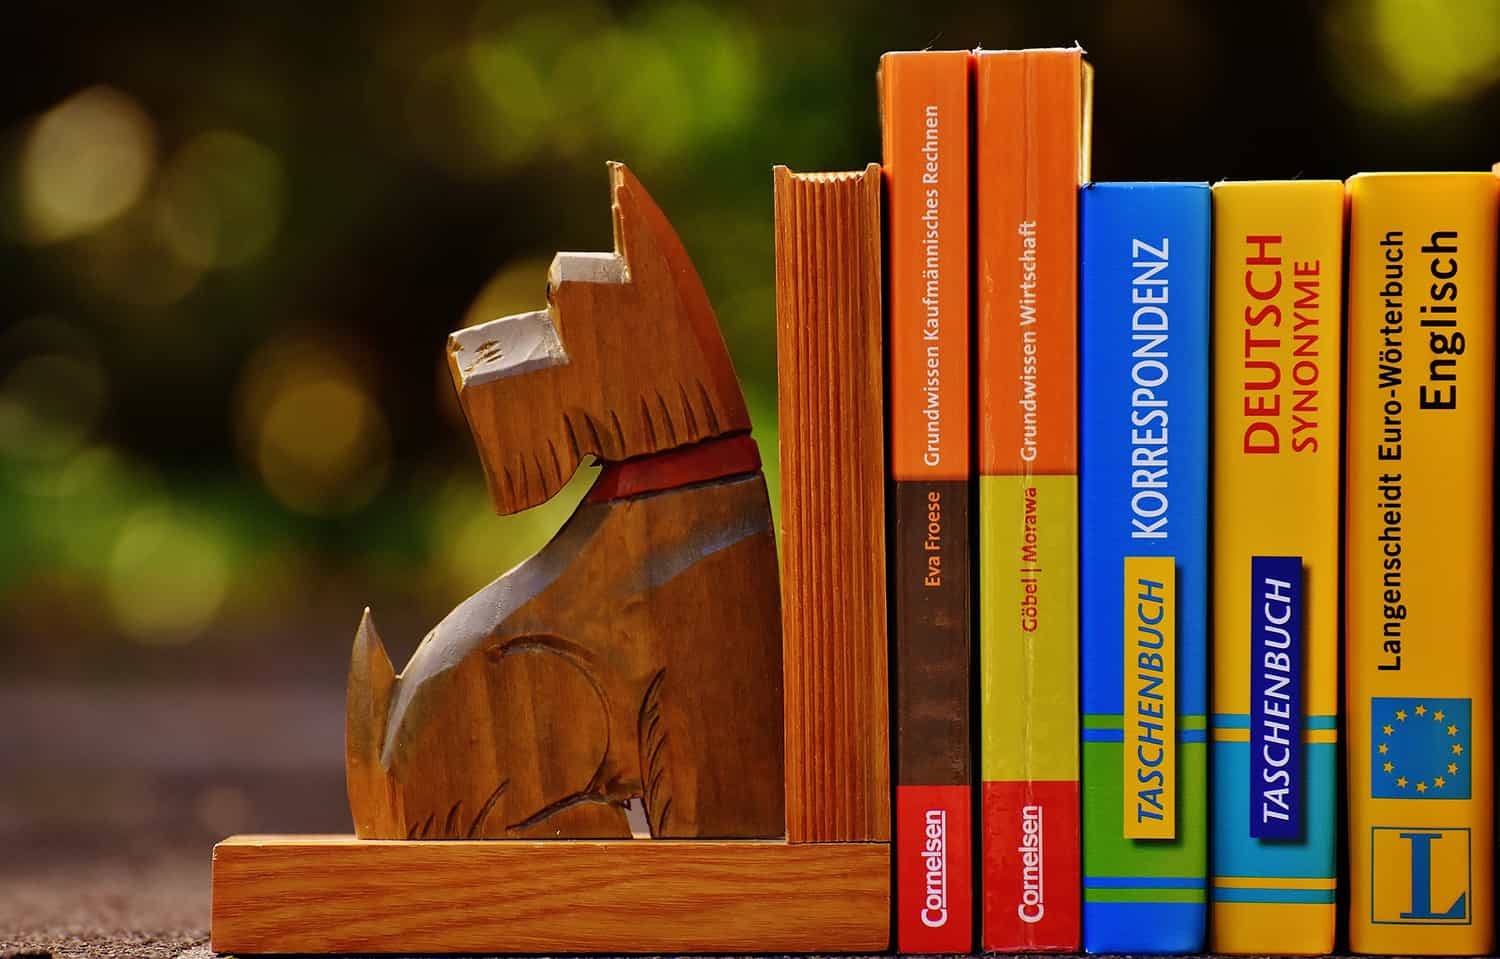 wooden bookends